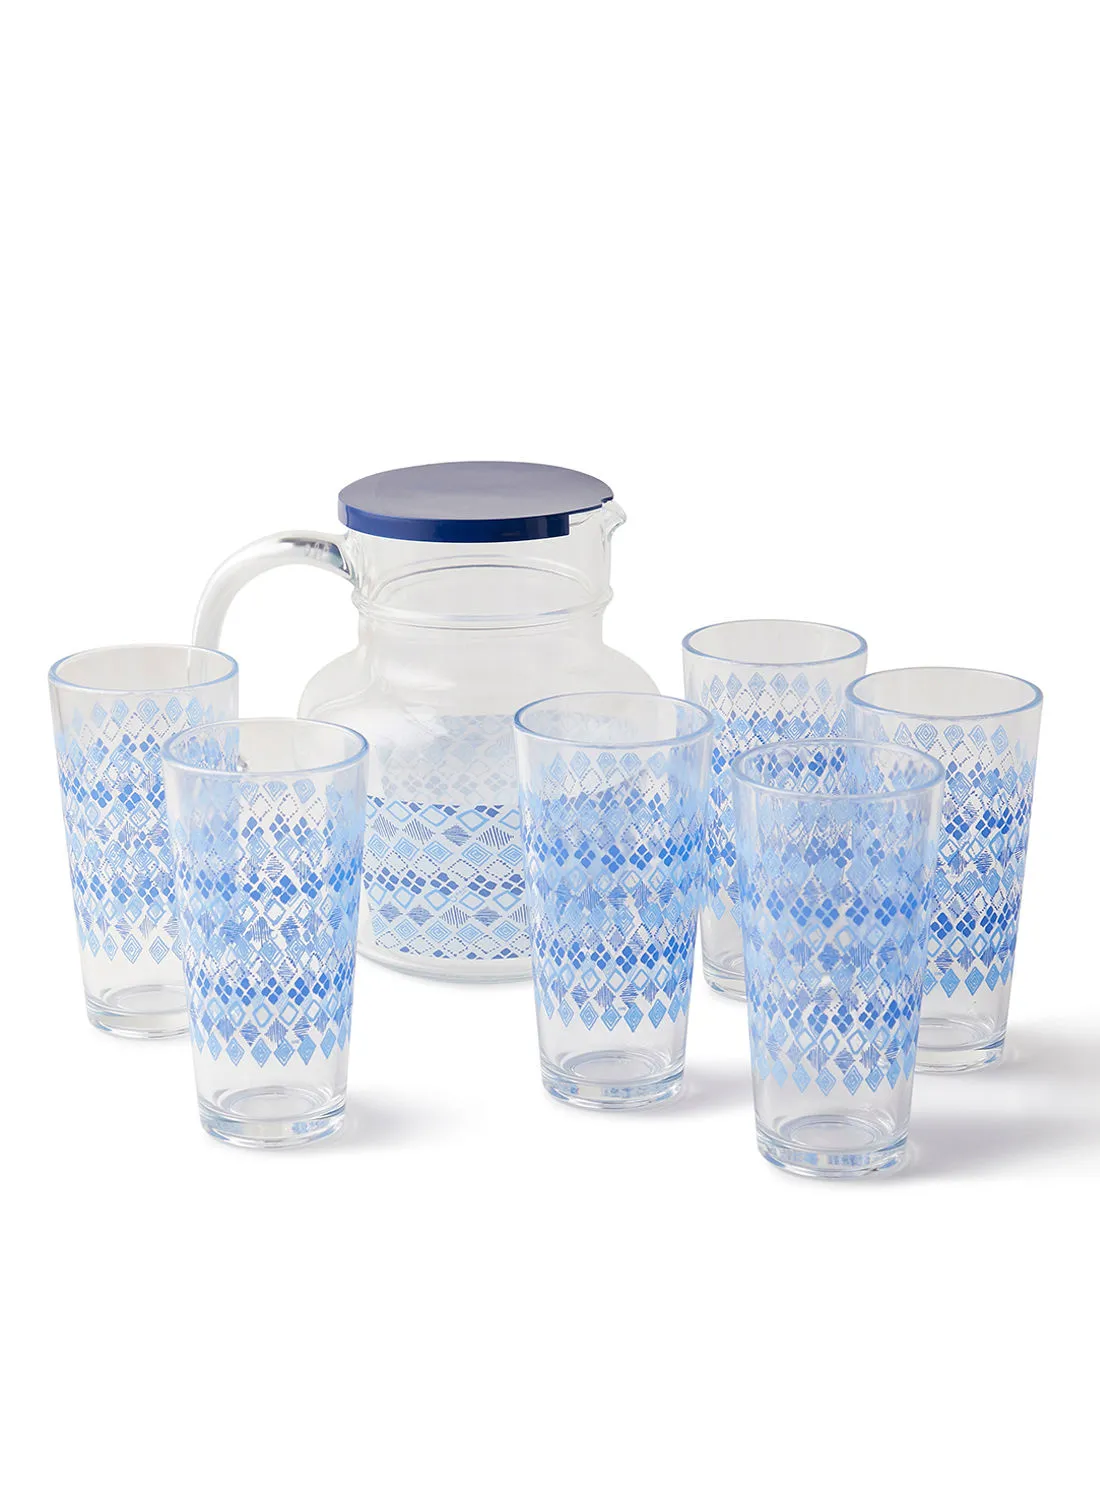 noon east 7 Piece Glass Drink Set Beverage Glasses For Juices - By Noon East - Jug 1.4 L, Tumblers 27 Cl - Serves 6 - Hamsini